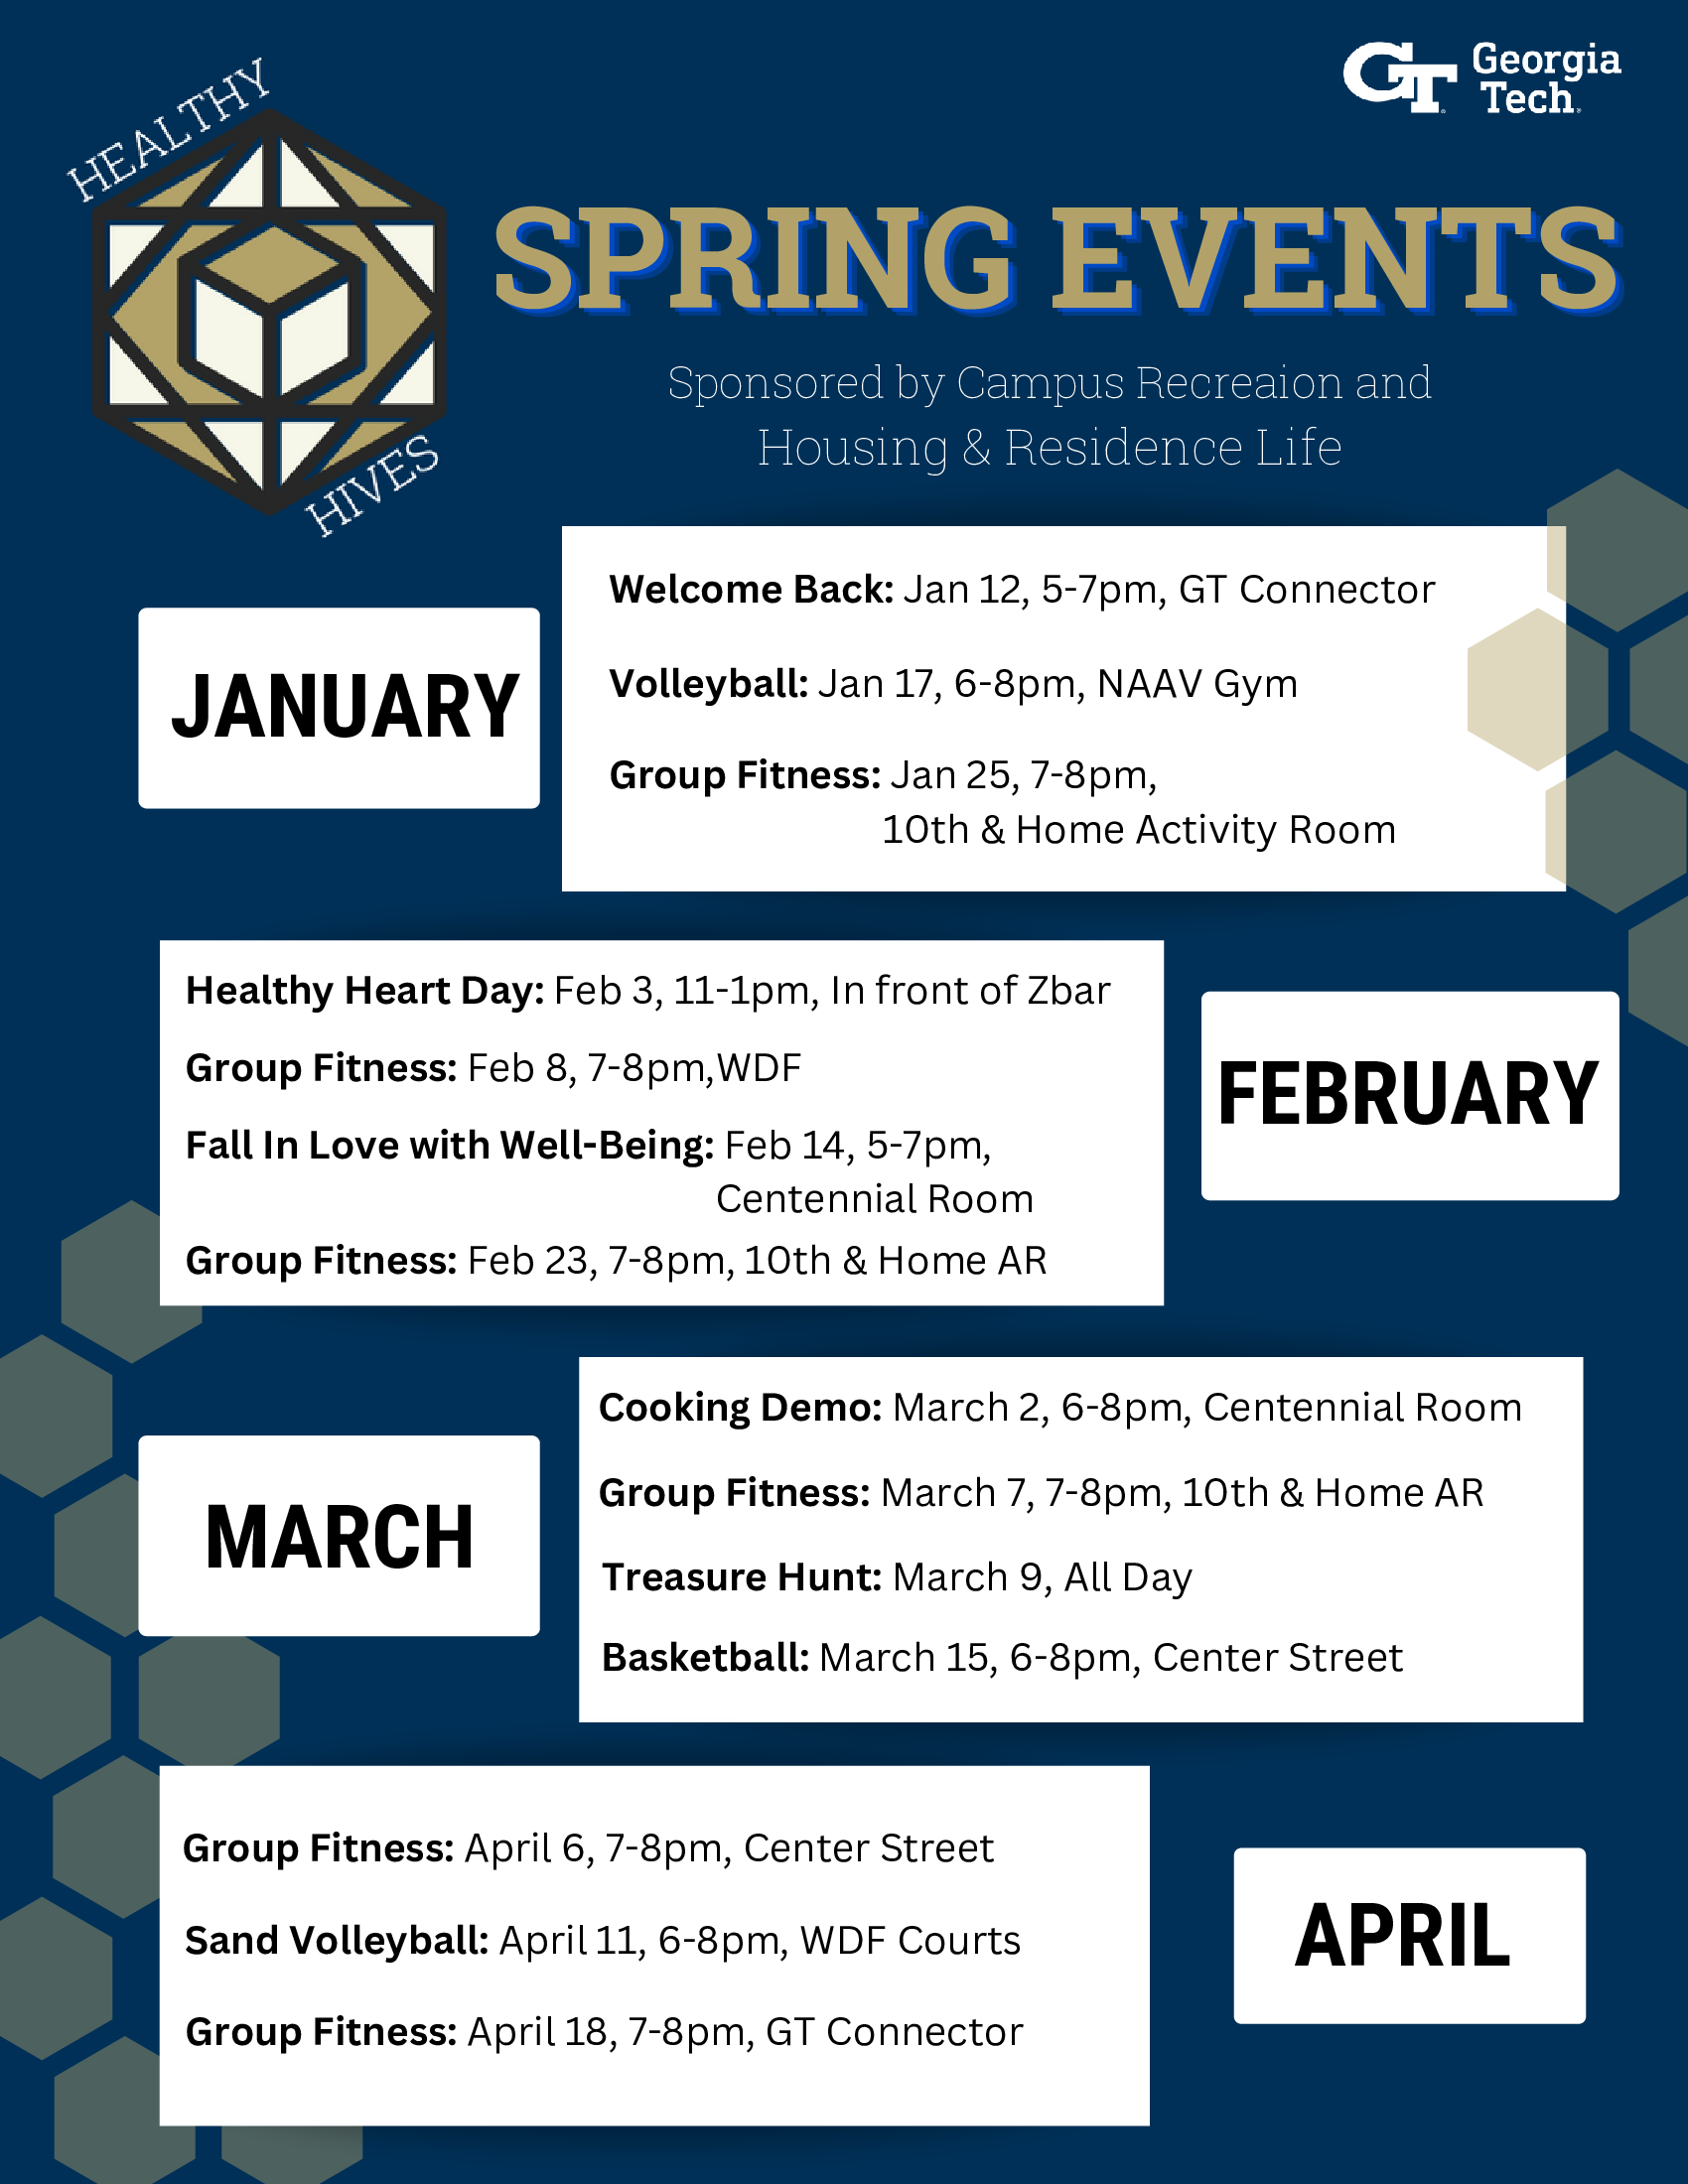 Spring Events January-April